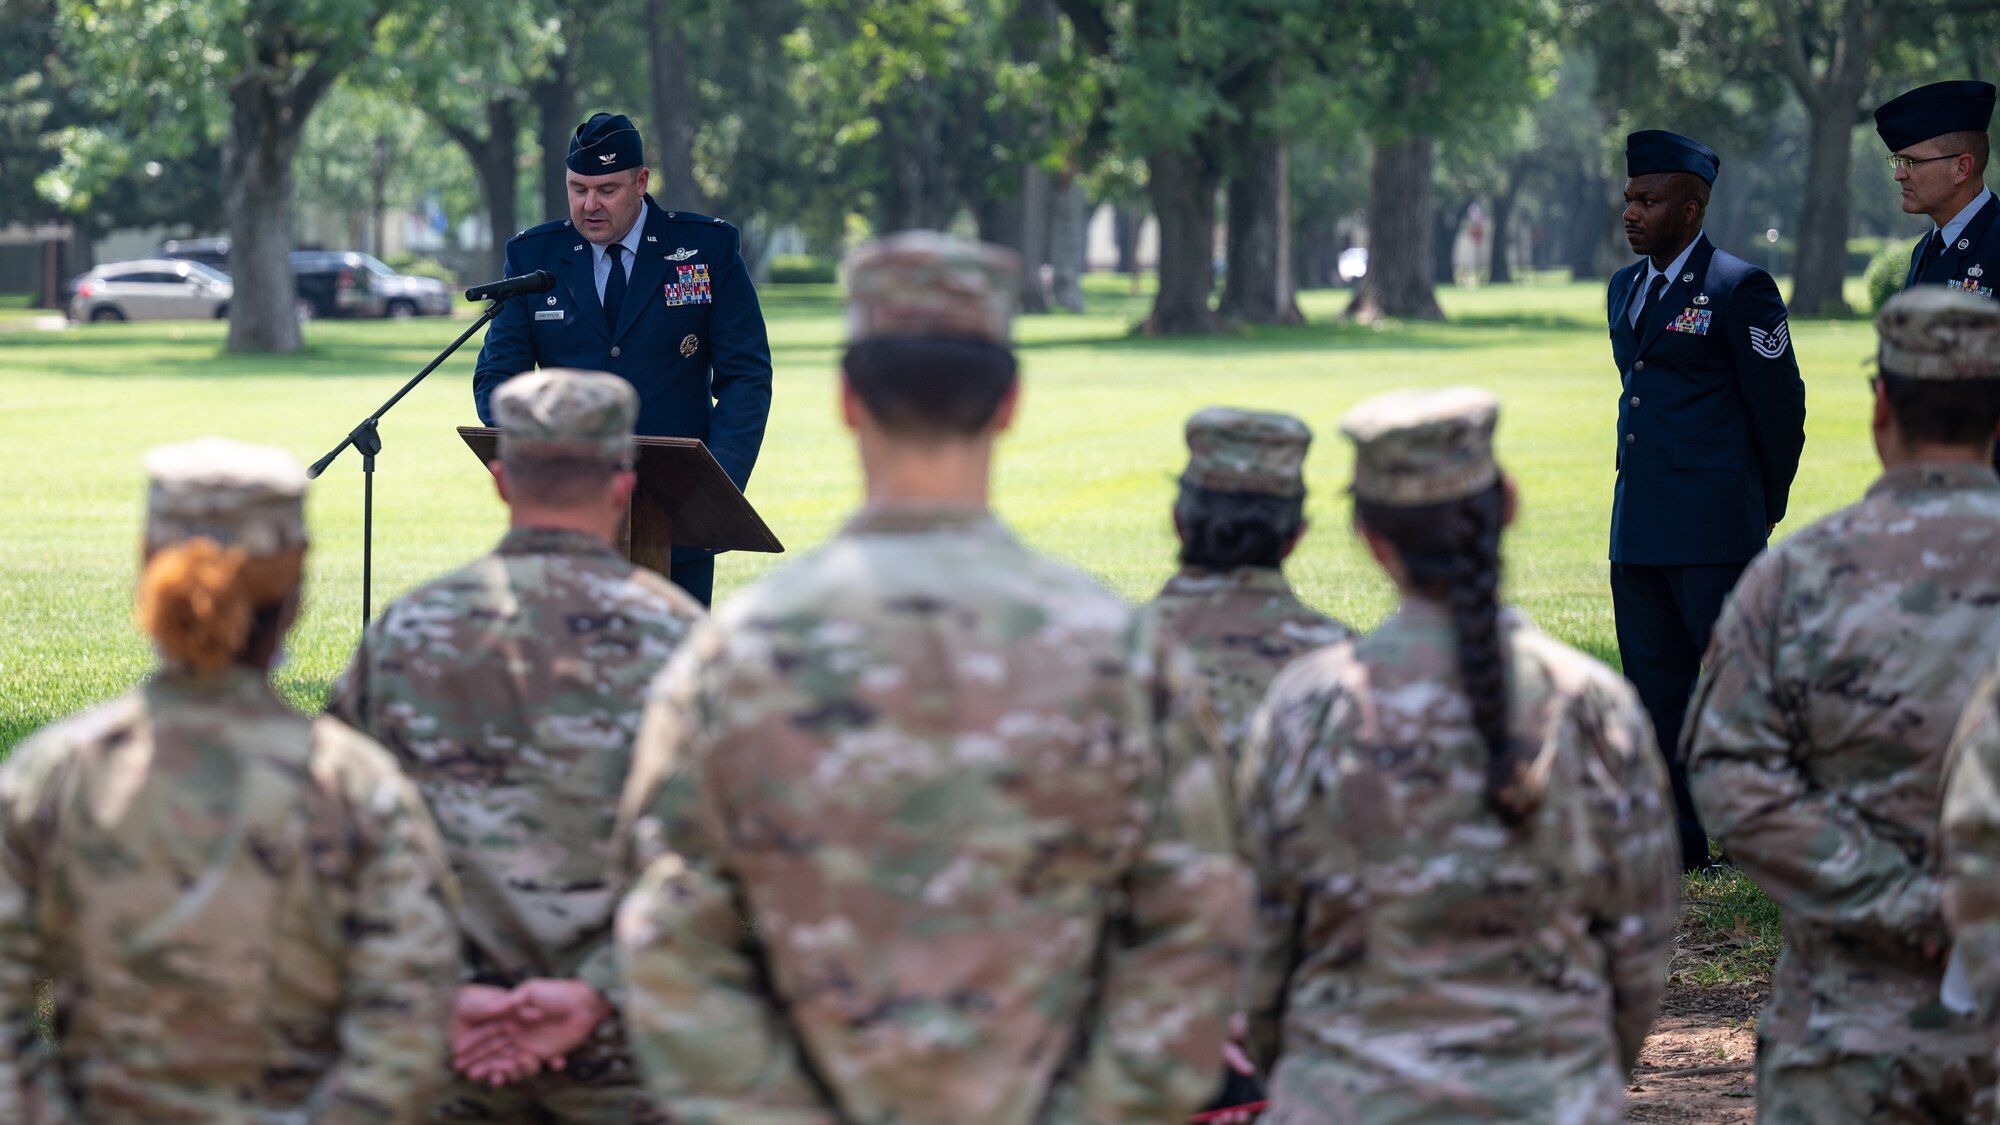 Col. Mark Dmytryszyn, 2nd Bomb Wing commander, gives his remarks during the Purser Park Monument unveiling ceremony at Barksdale Air Force Base, Louisiana, July 30, 2021. Lt. Brittain Purser was a pilot who passed away during a take-off collision at Barksdale and the monument honors Purser's bravery and dedication to the Air Force mission. (U.S. Air Force photo by Airman 1st Class Jonathan E. Ramos)